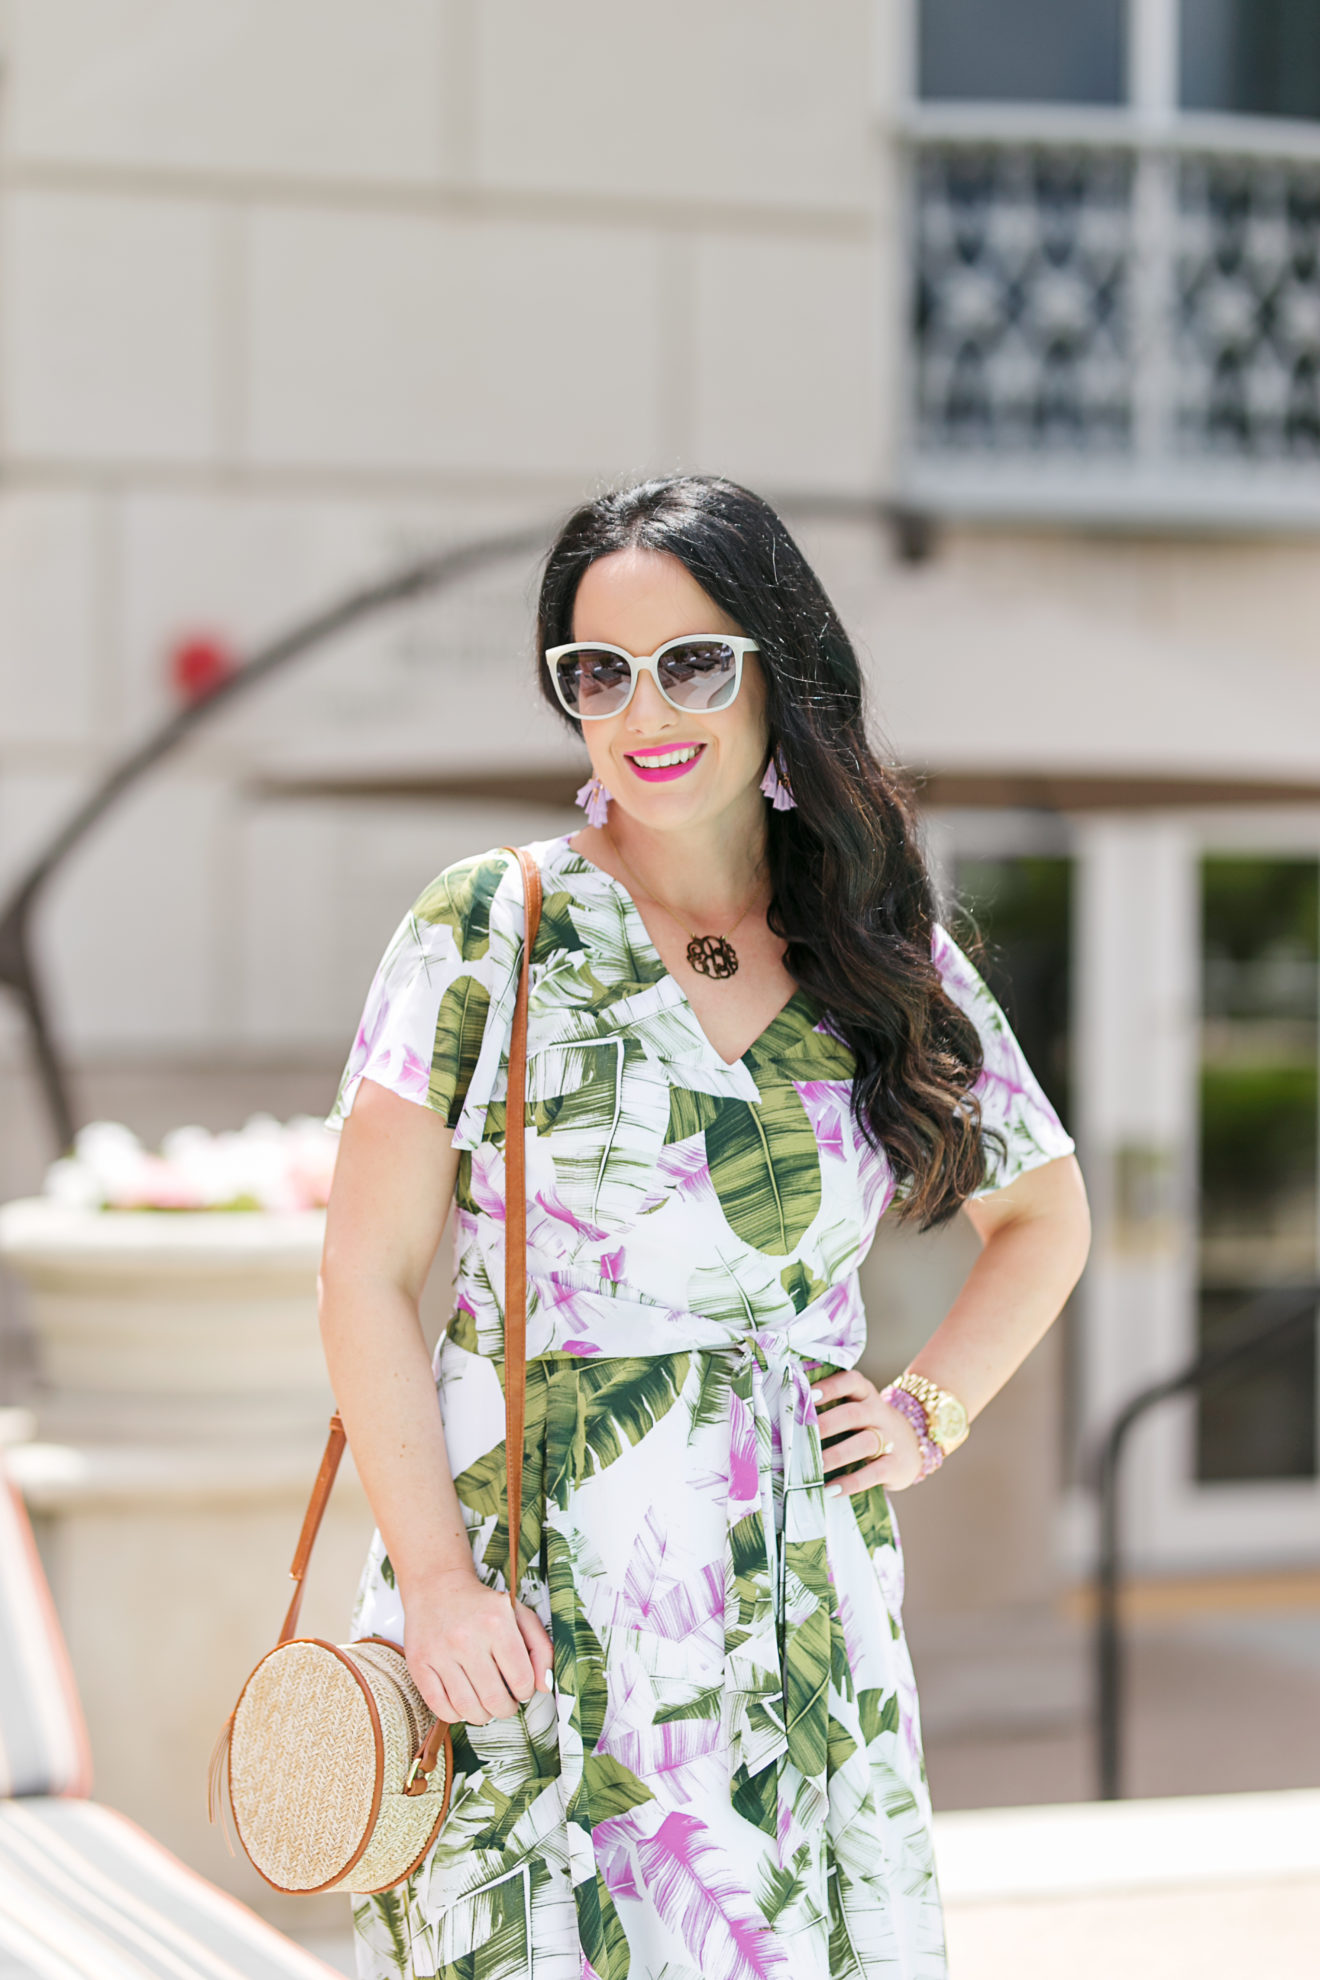 Summer Dress Giveaway! + Kendra Scott Up To 25% Off Promo!